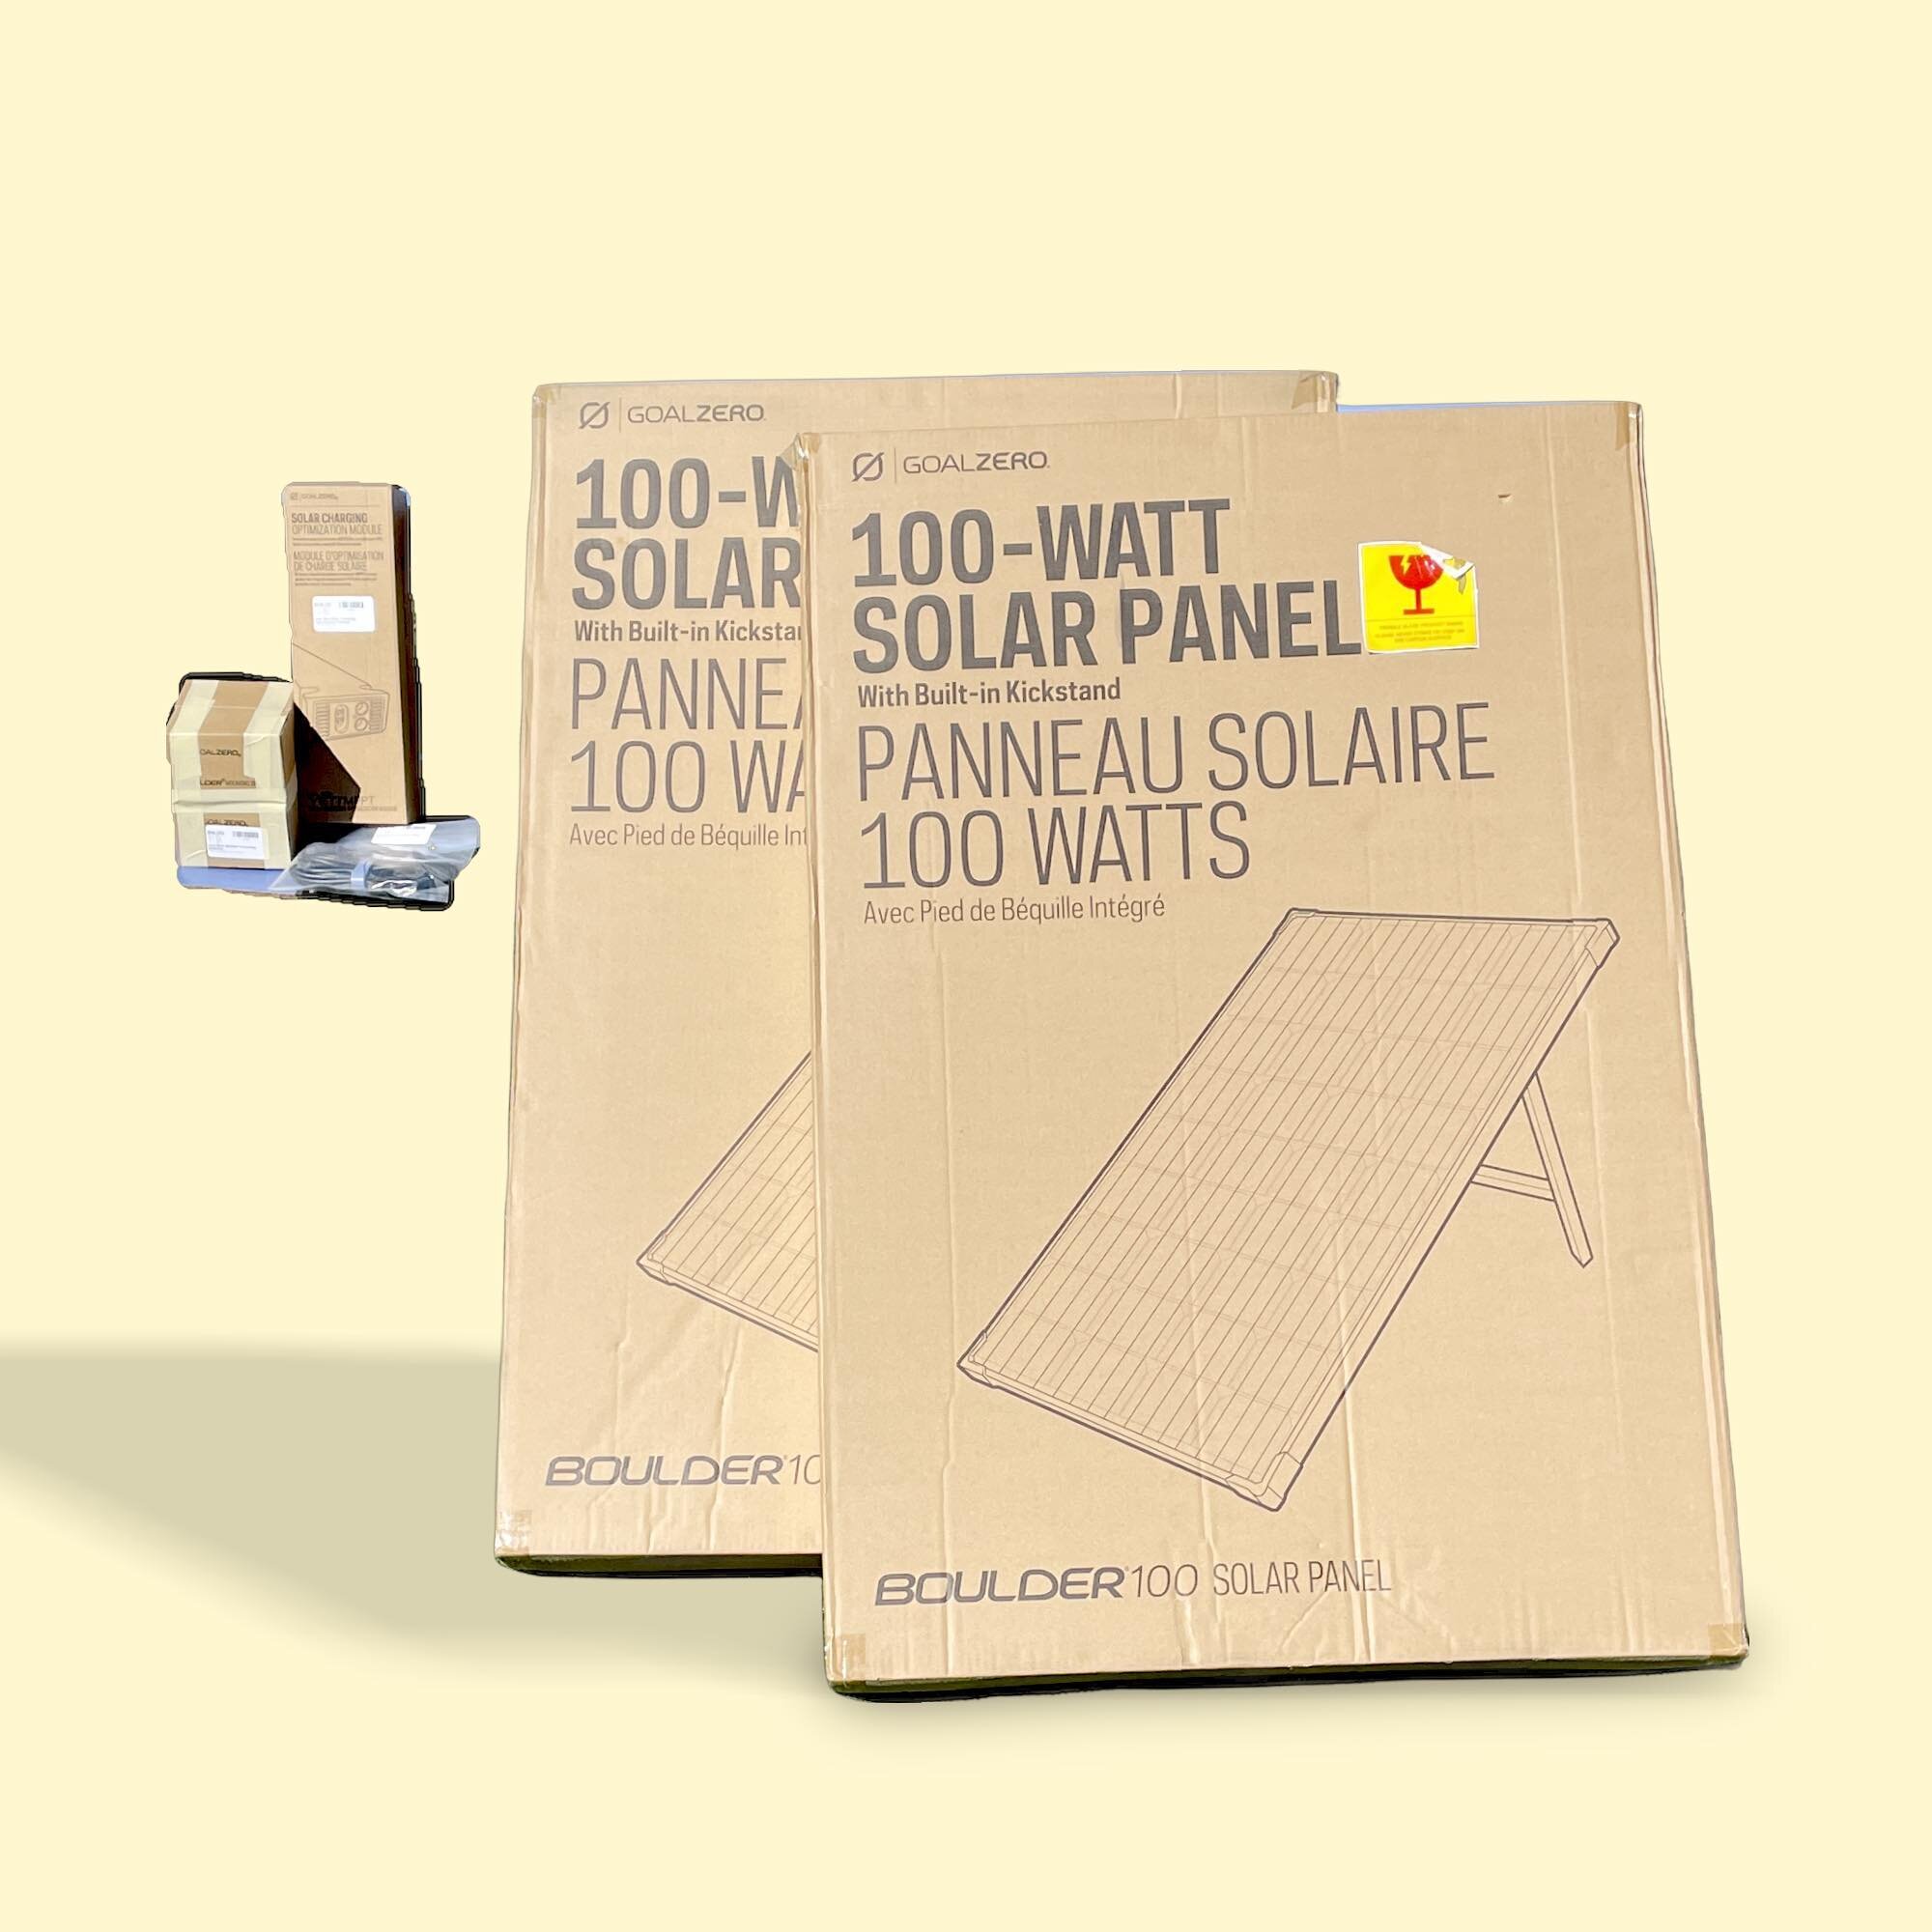 Power your dreams! Be the envy of dirtbag off grid campers everywhere with this Goal Zero Solar Panel kit.

Boulder 100 Solar Panel (x2)
MSRP: $250 each
Cc:$189 each 

Mounting brackets (x4)
MSRP: $20
Cc:$14

Solar Charging Optimization Module
MSRP: 